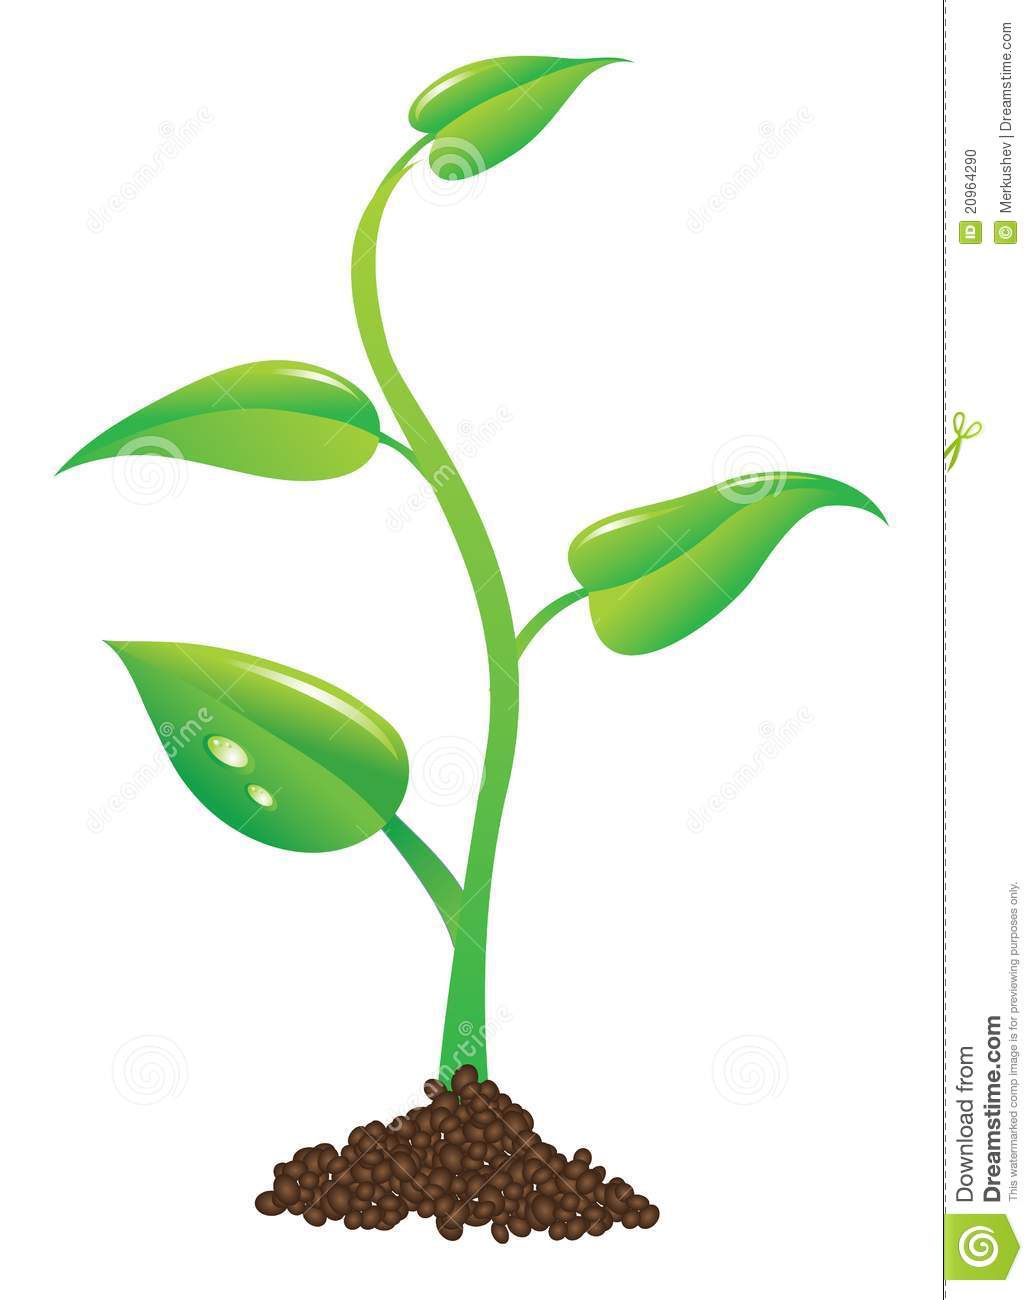 growth clipart plant seedling